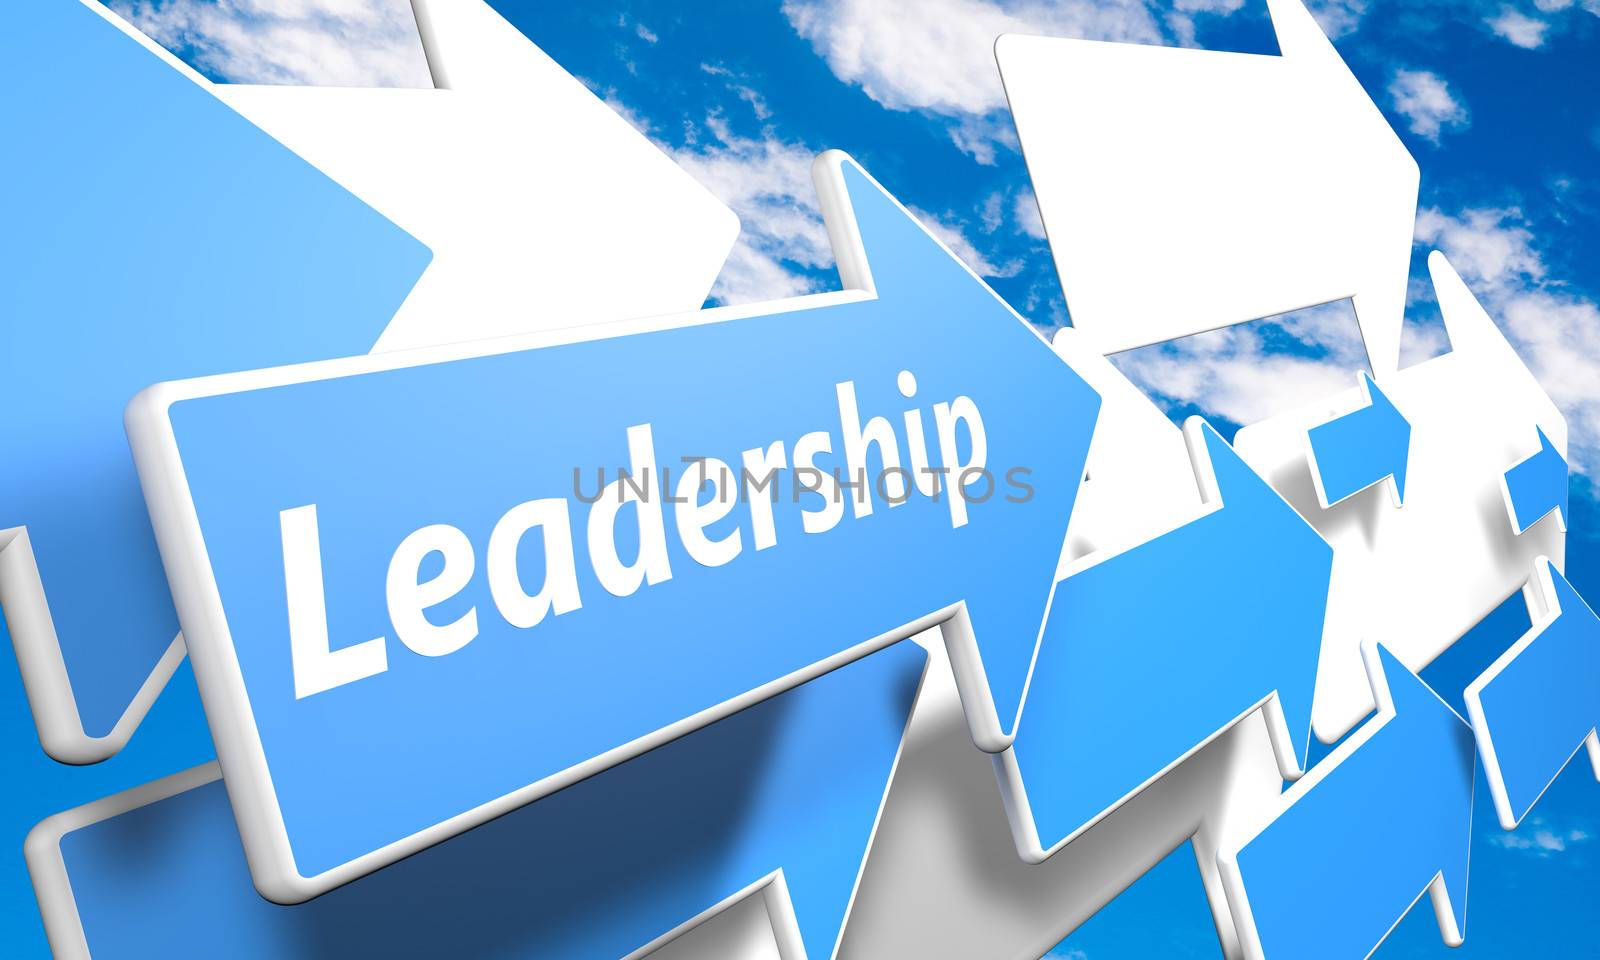 Leadership 3d render concept with blue and white arrows flying in a blue sky with clouds